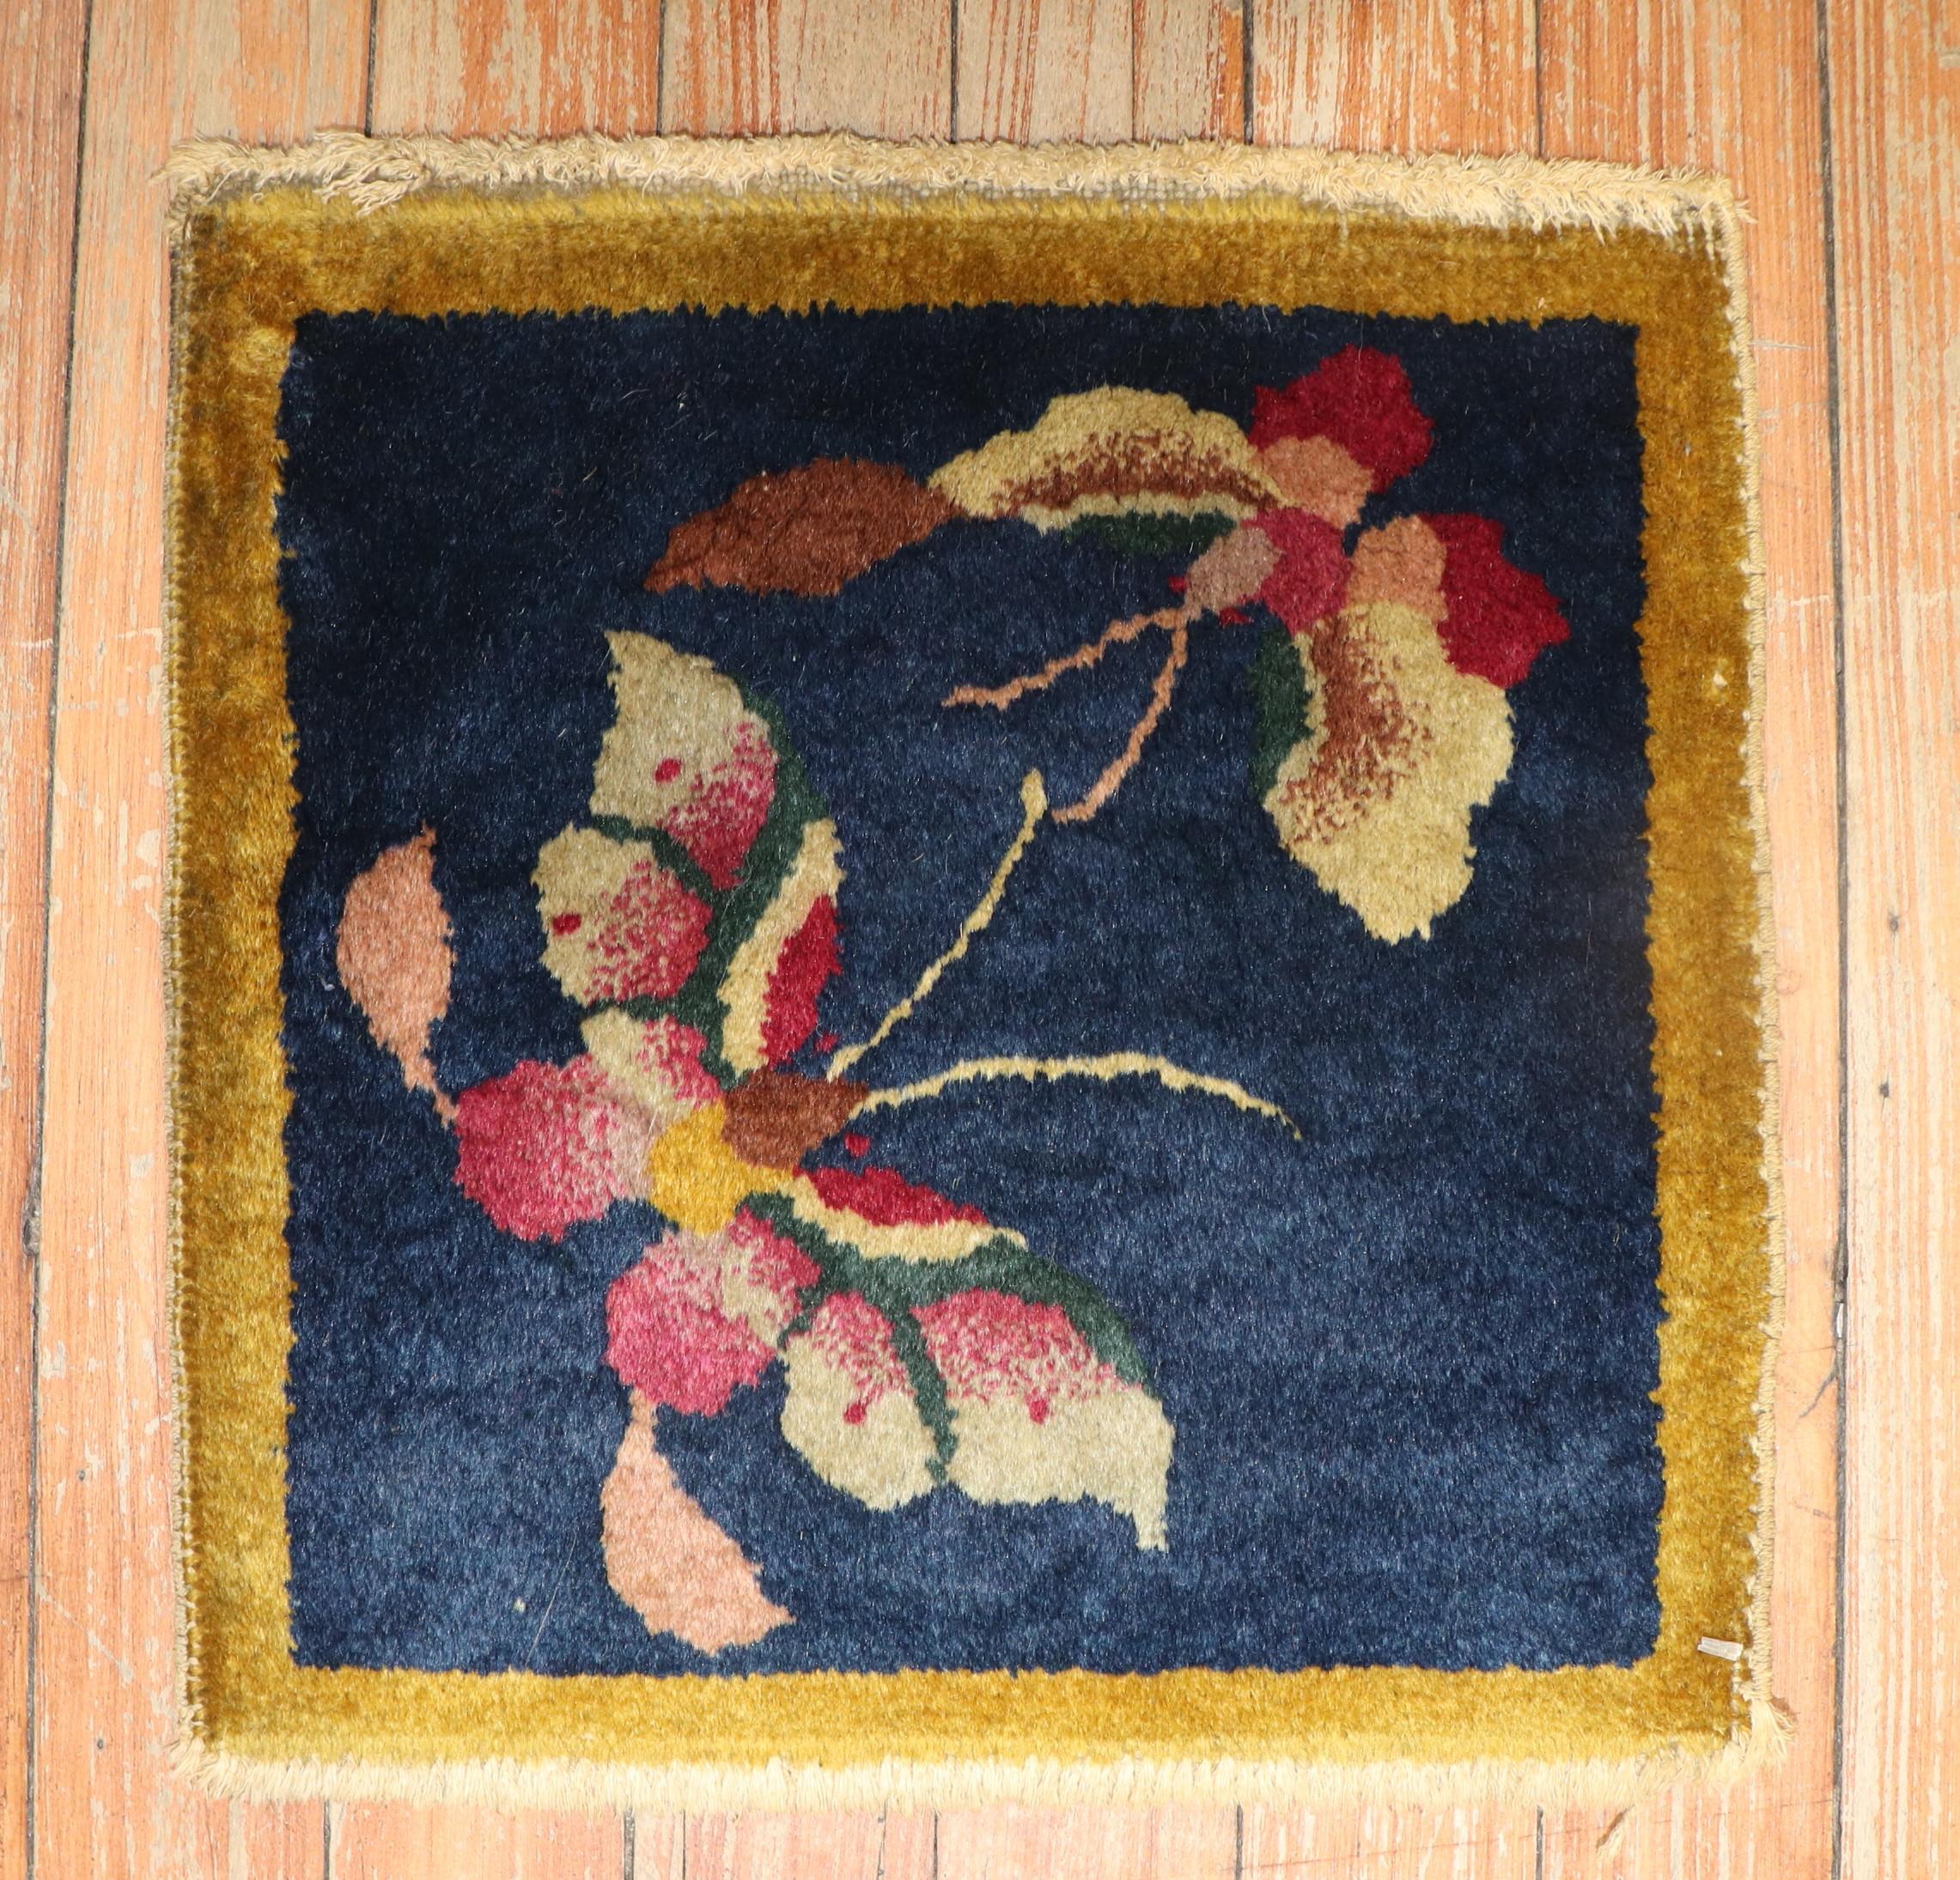 Rare size Chinese Nichols art deco miniature square rug from the 1940s.

Measures: 12'' x 12''